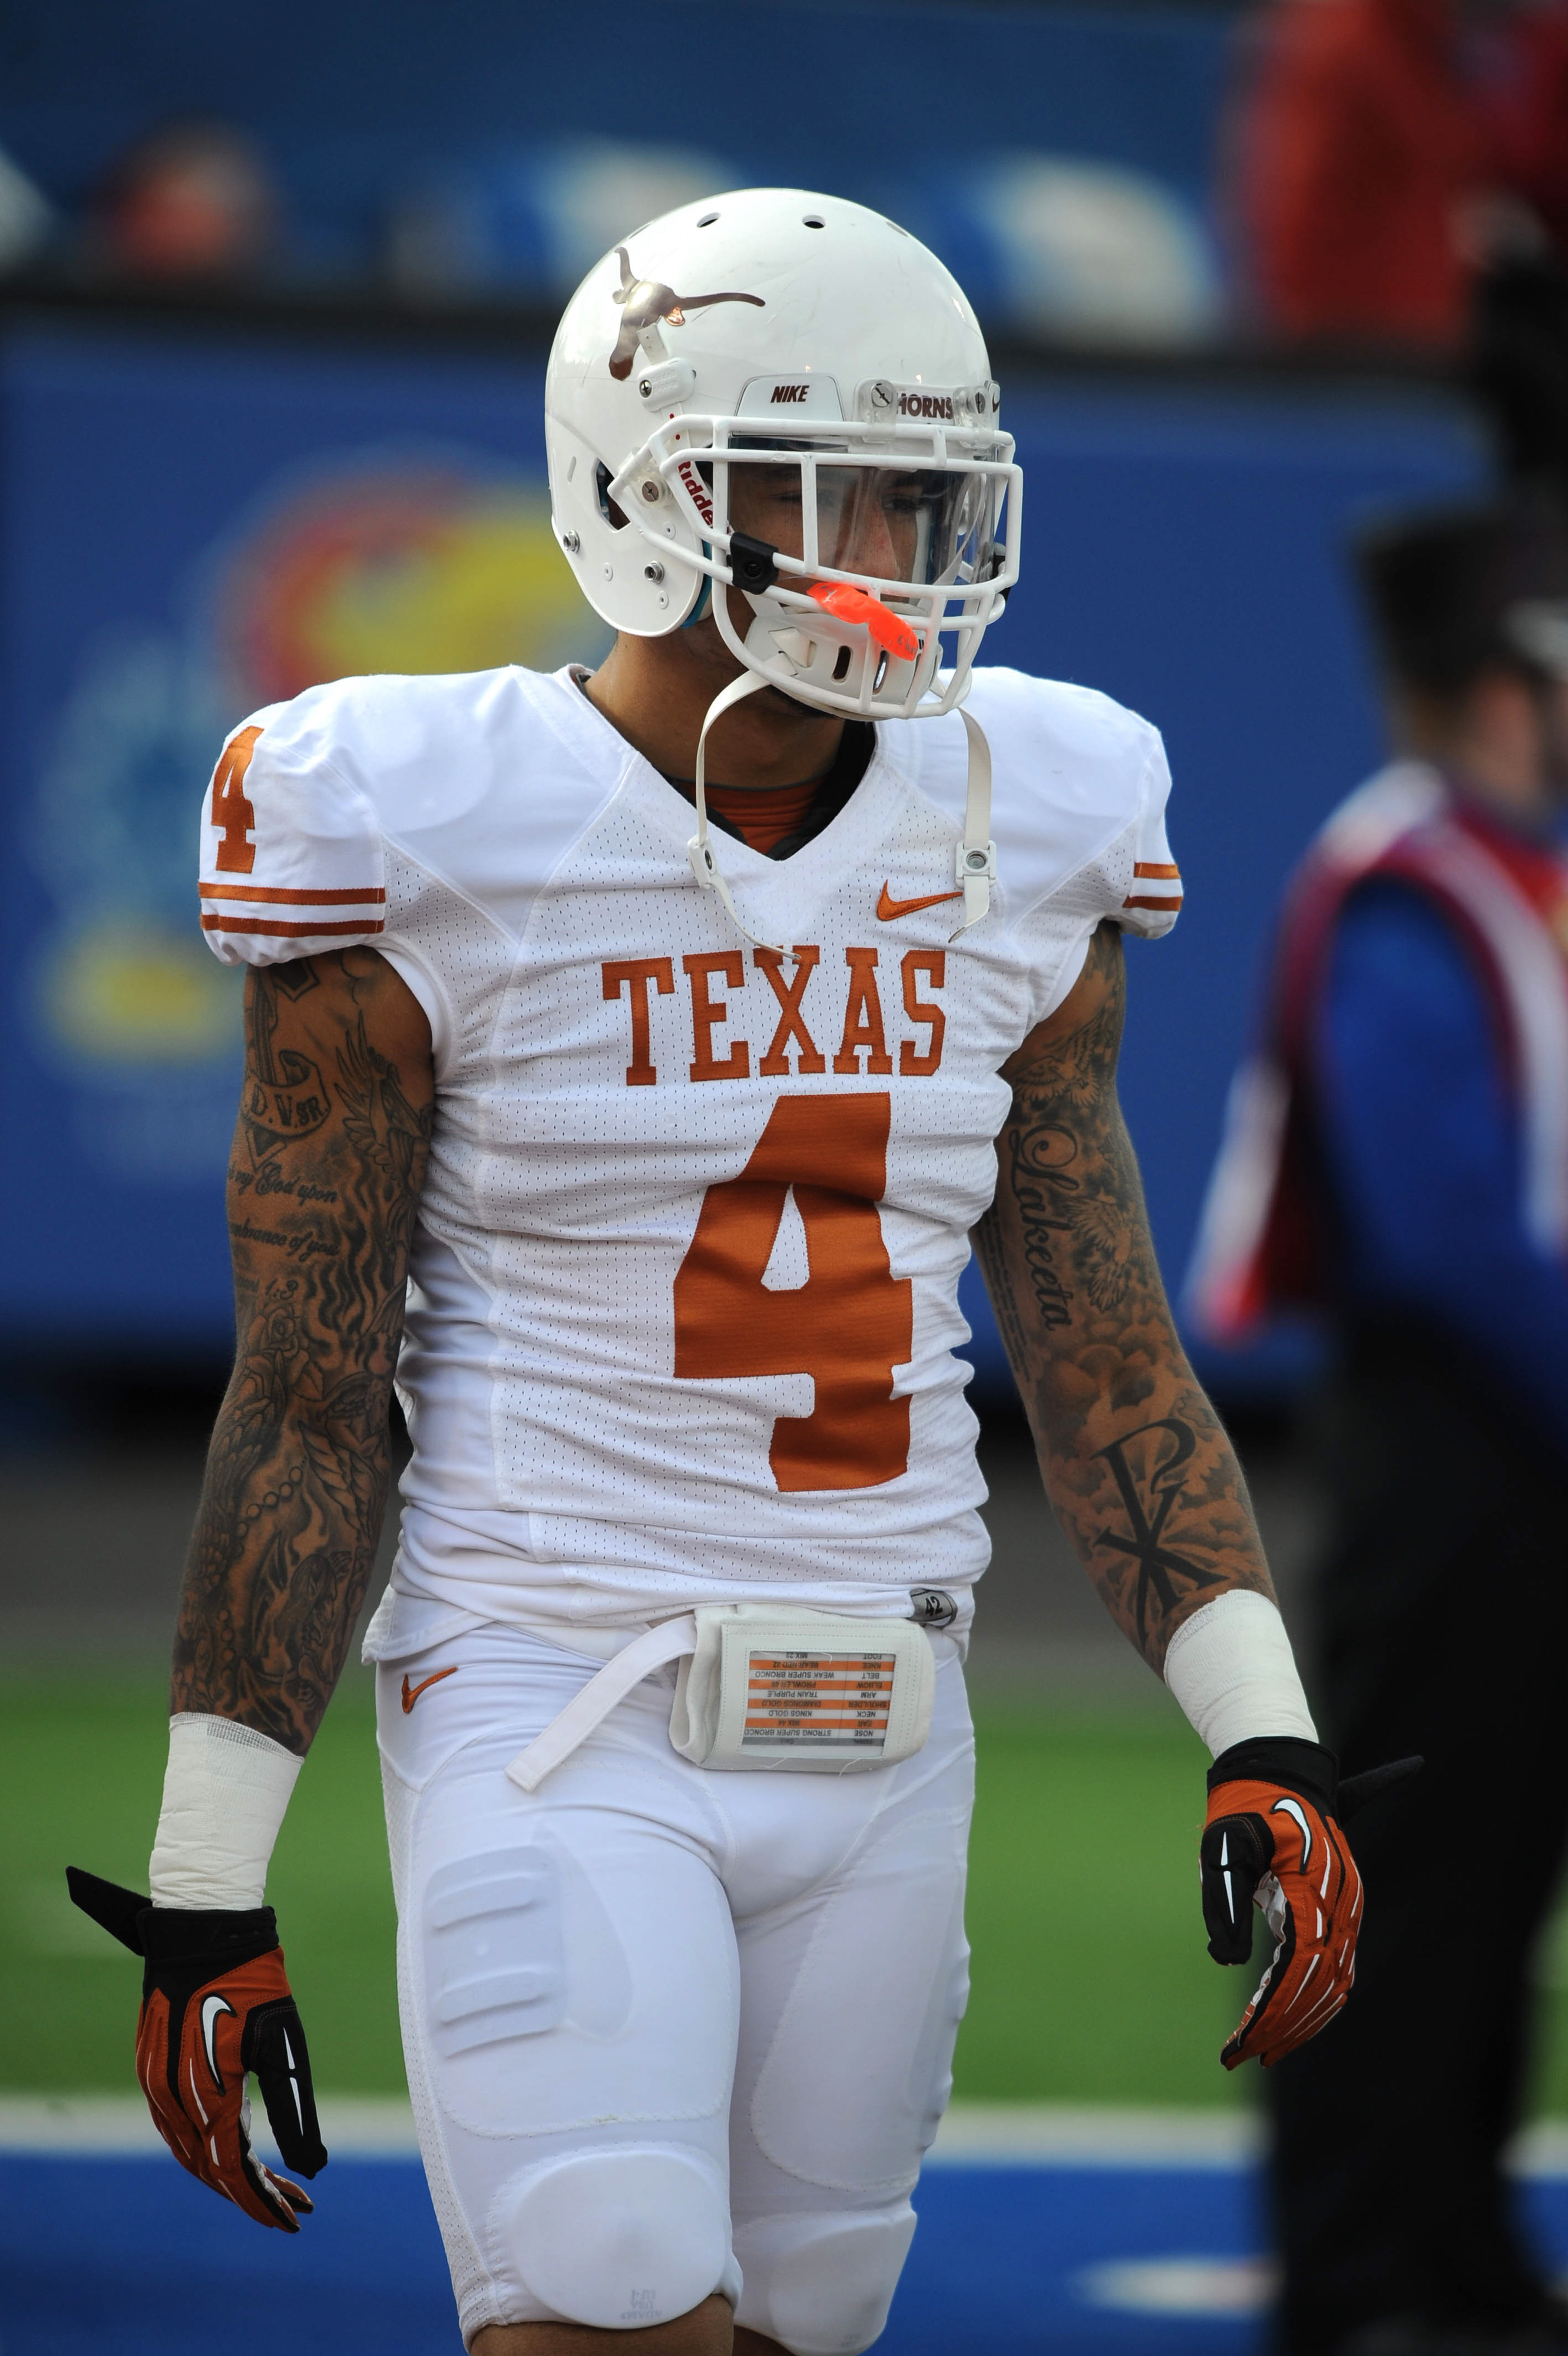 Is Kenny Vaccaro a future Panther?